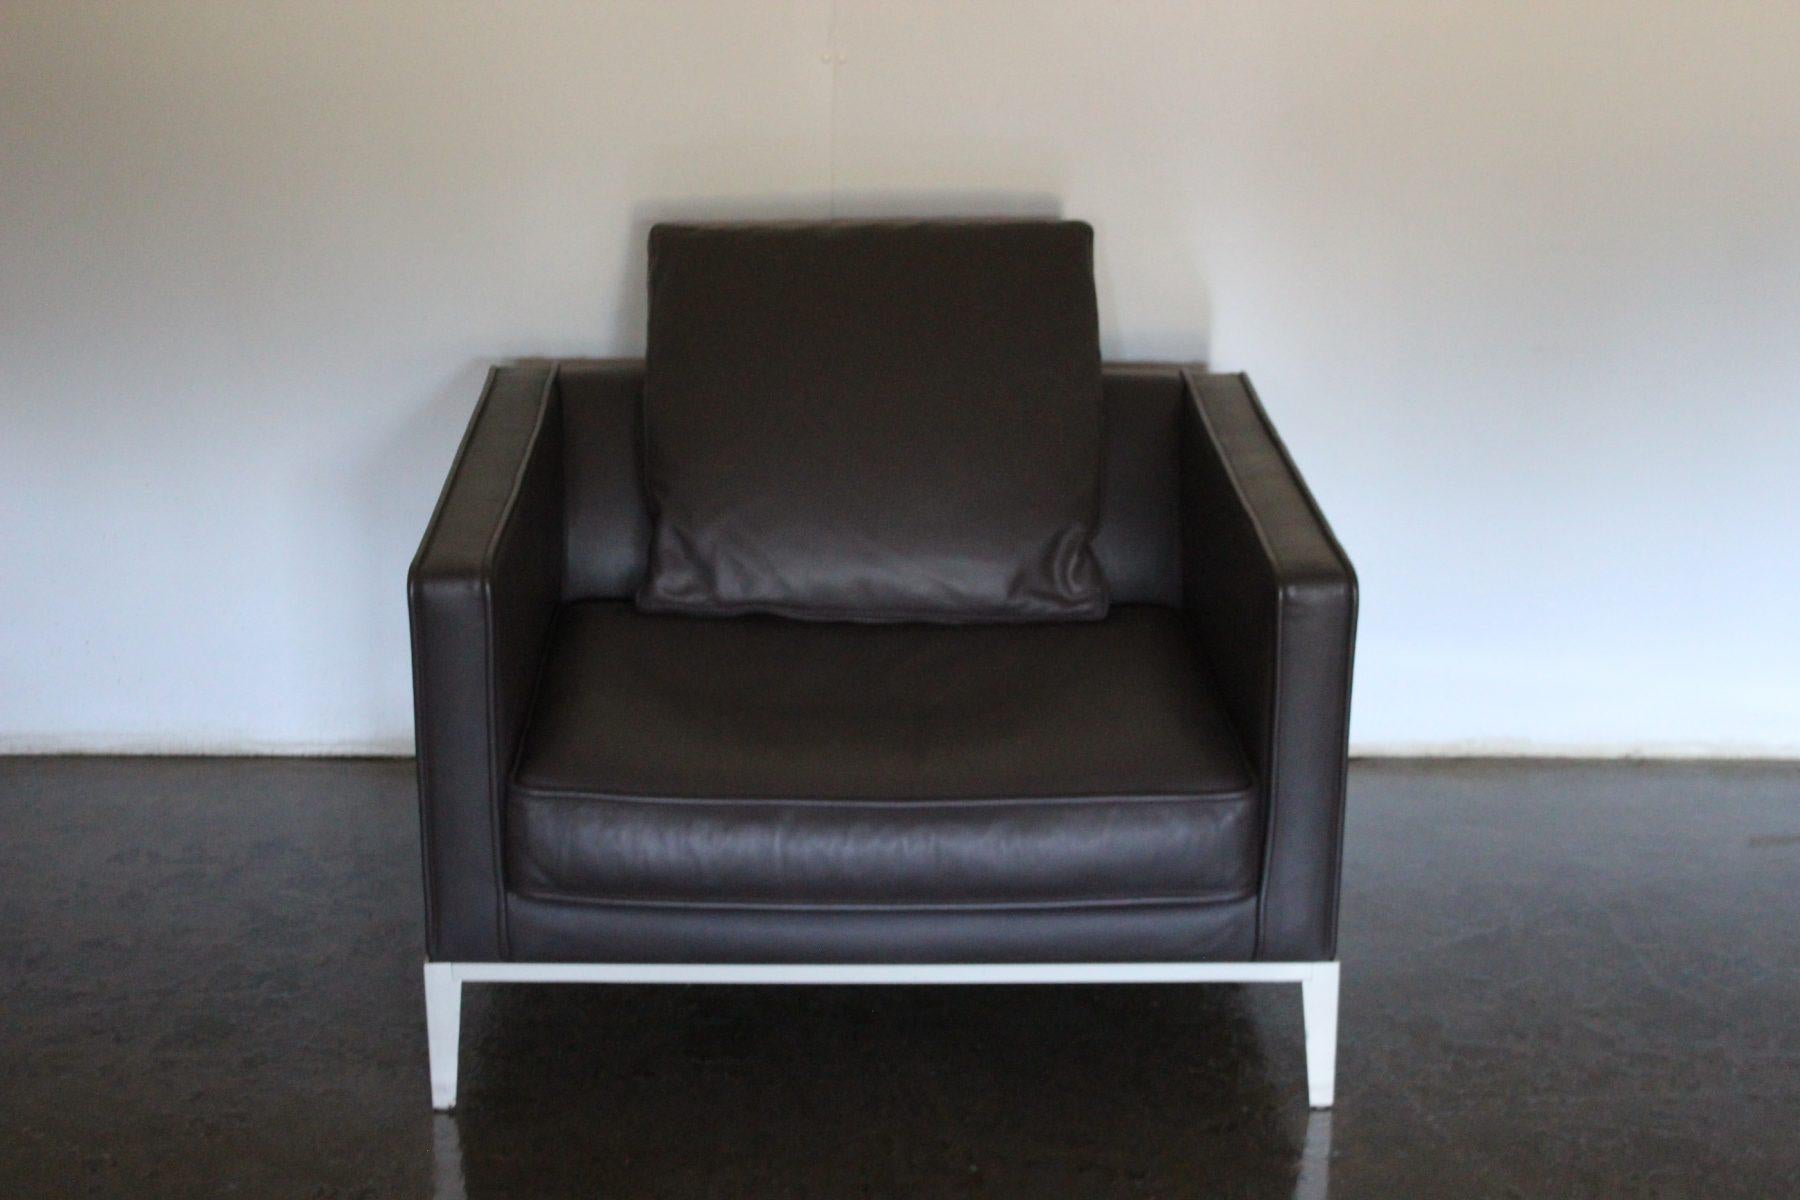 Mint B&B Italia “Simplice” Large Armchair in “Gamma” Dark-Brown Leather In Good Condition For Sale In Barrowford, GB